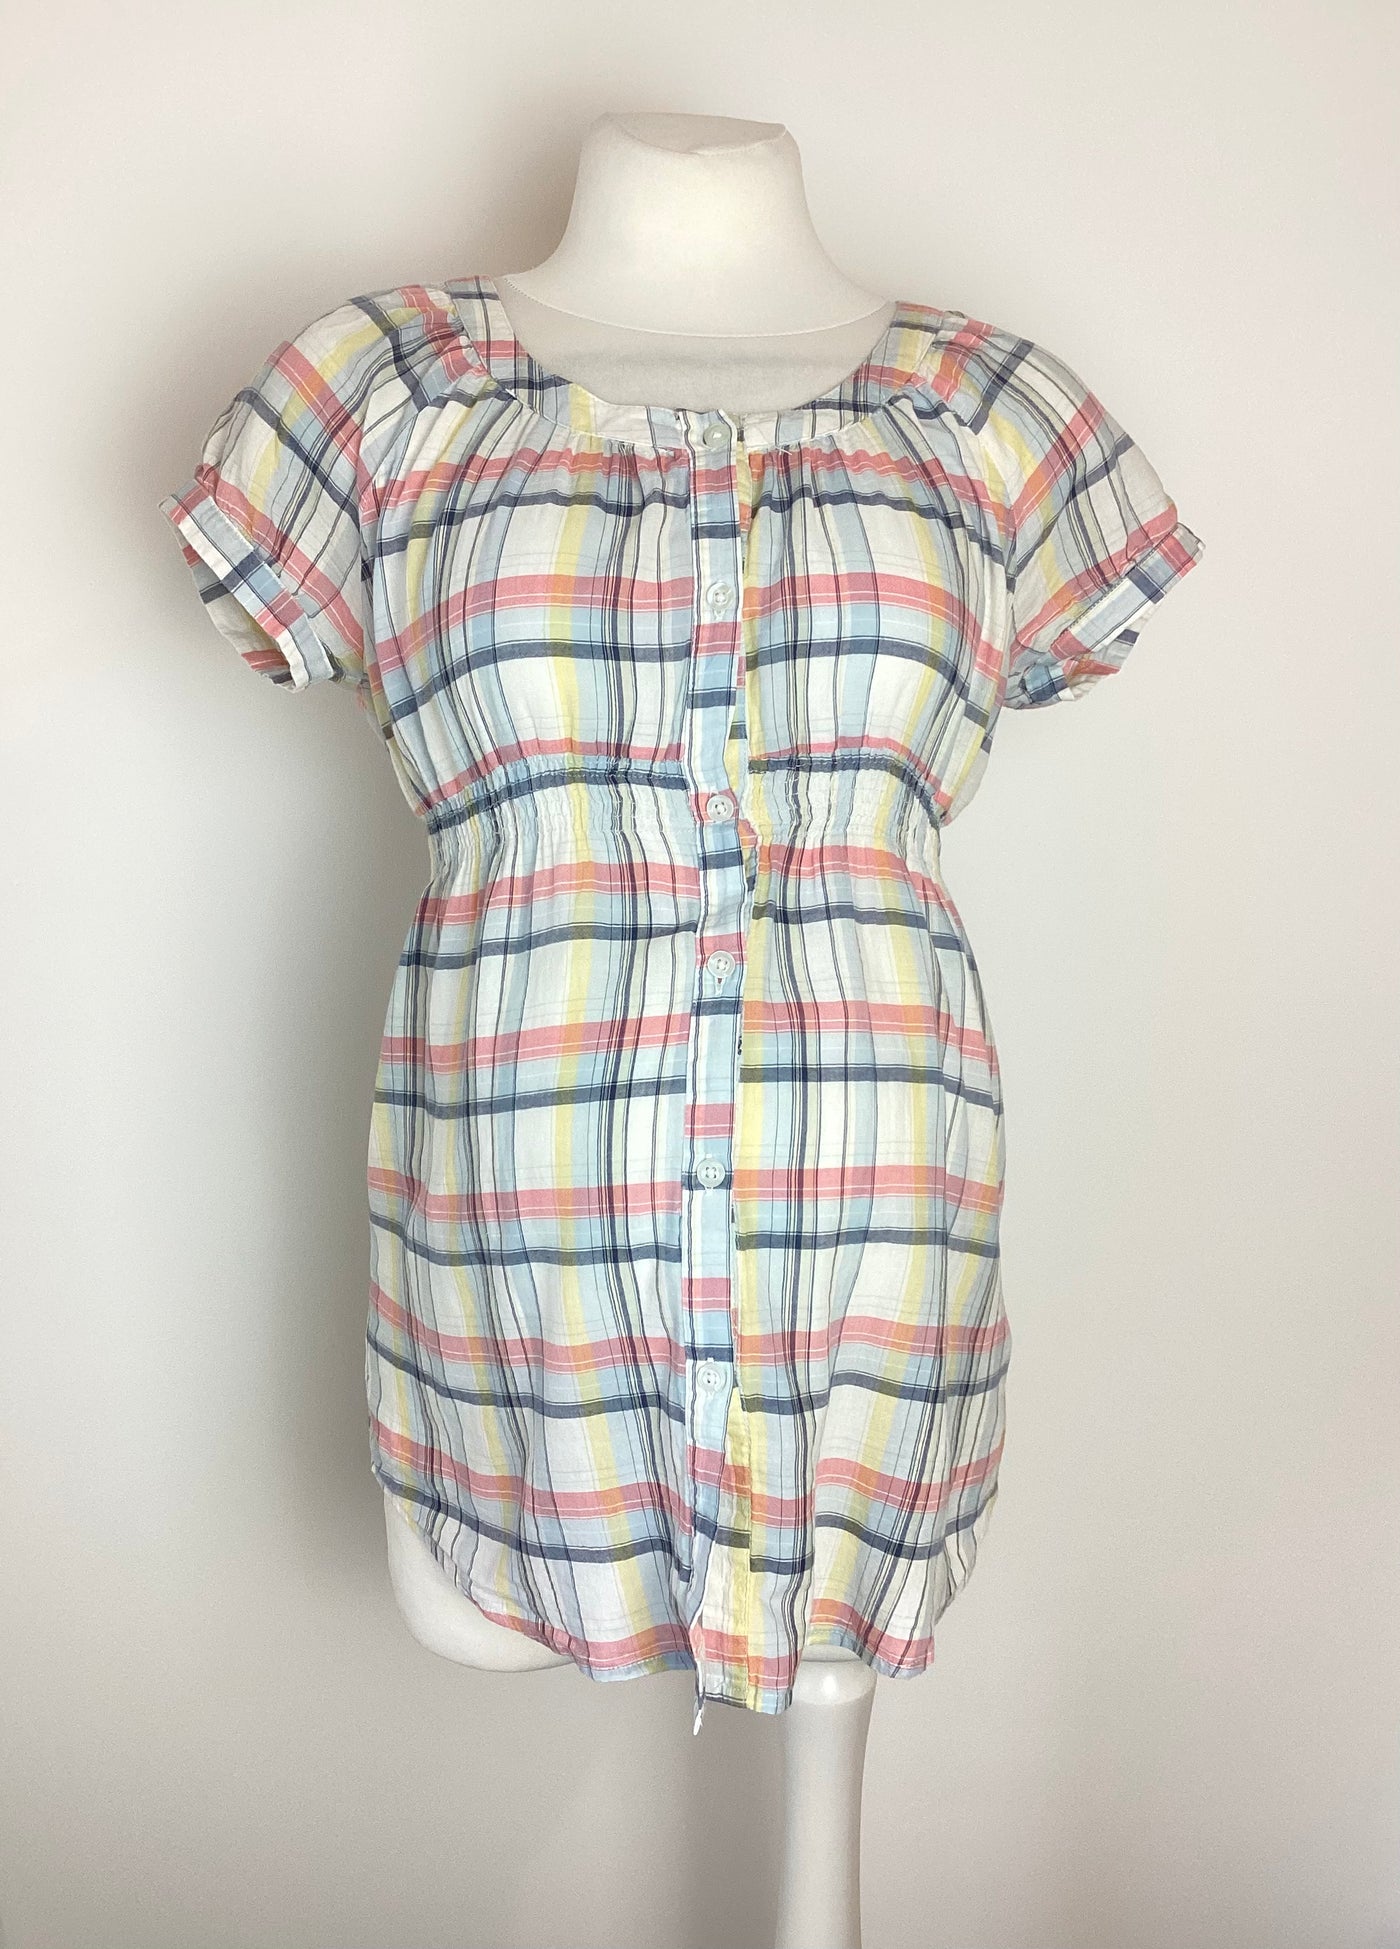 New Look Maternity pink, blue, yellow & white check short sleeved shirt - Size 8